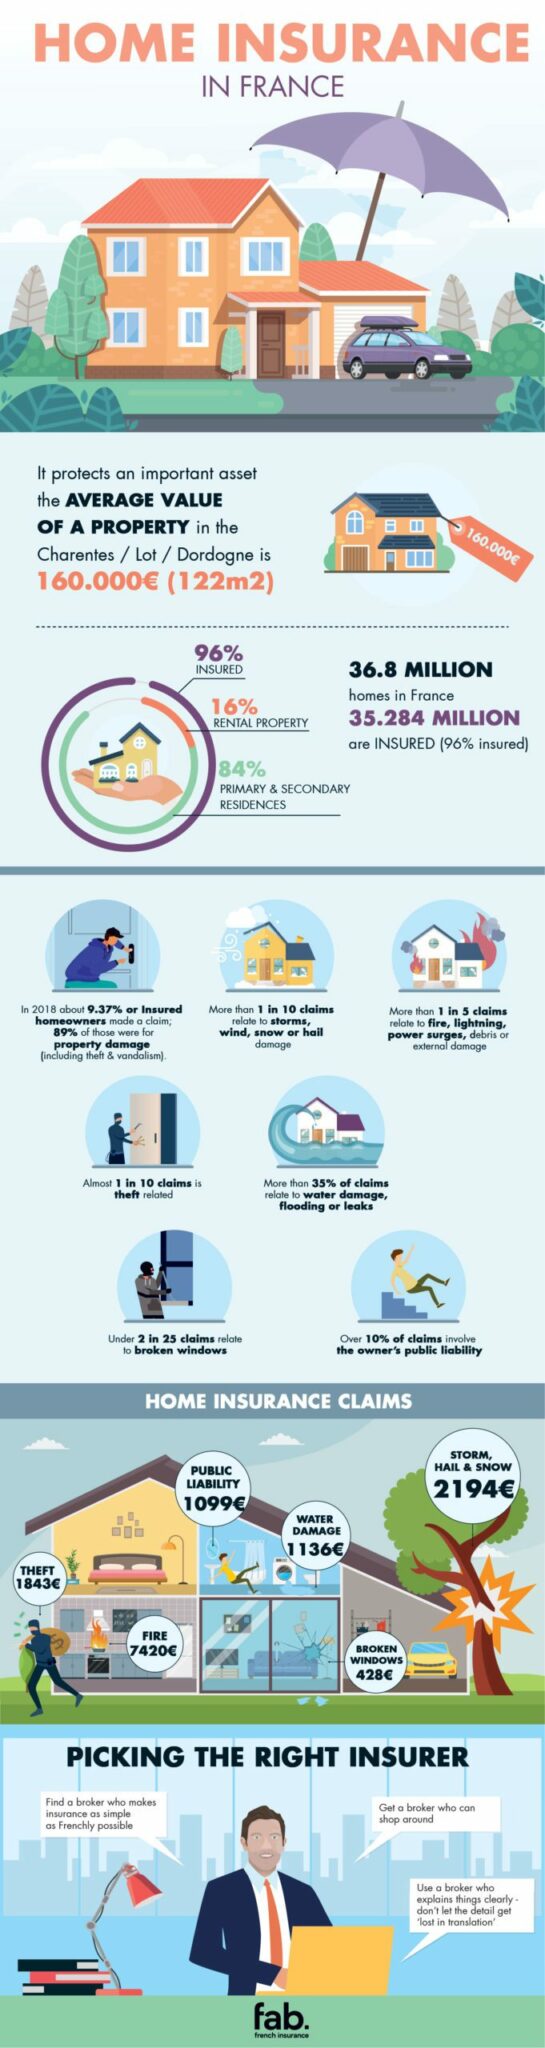 Infographic home insurance in France